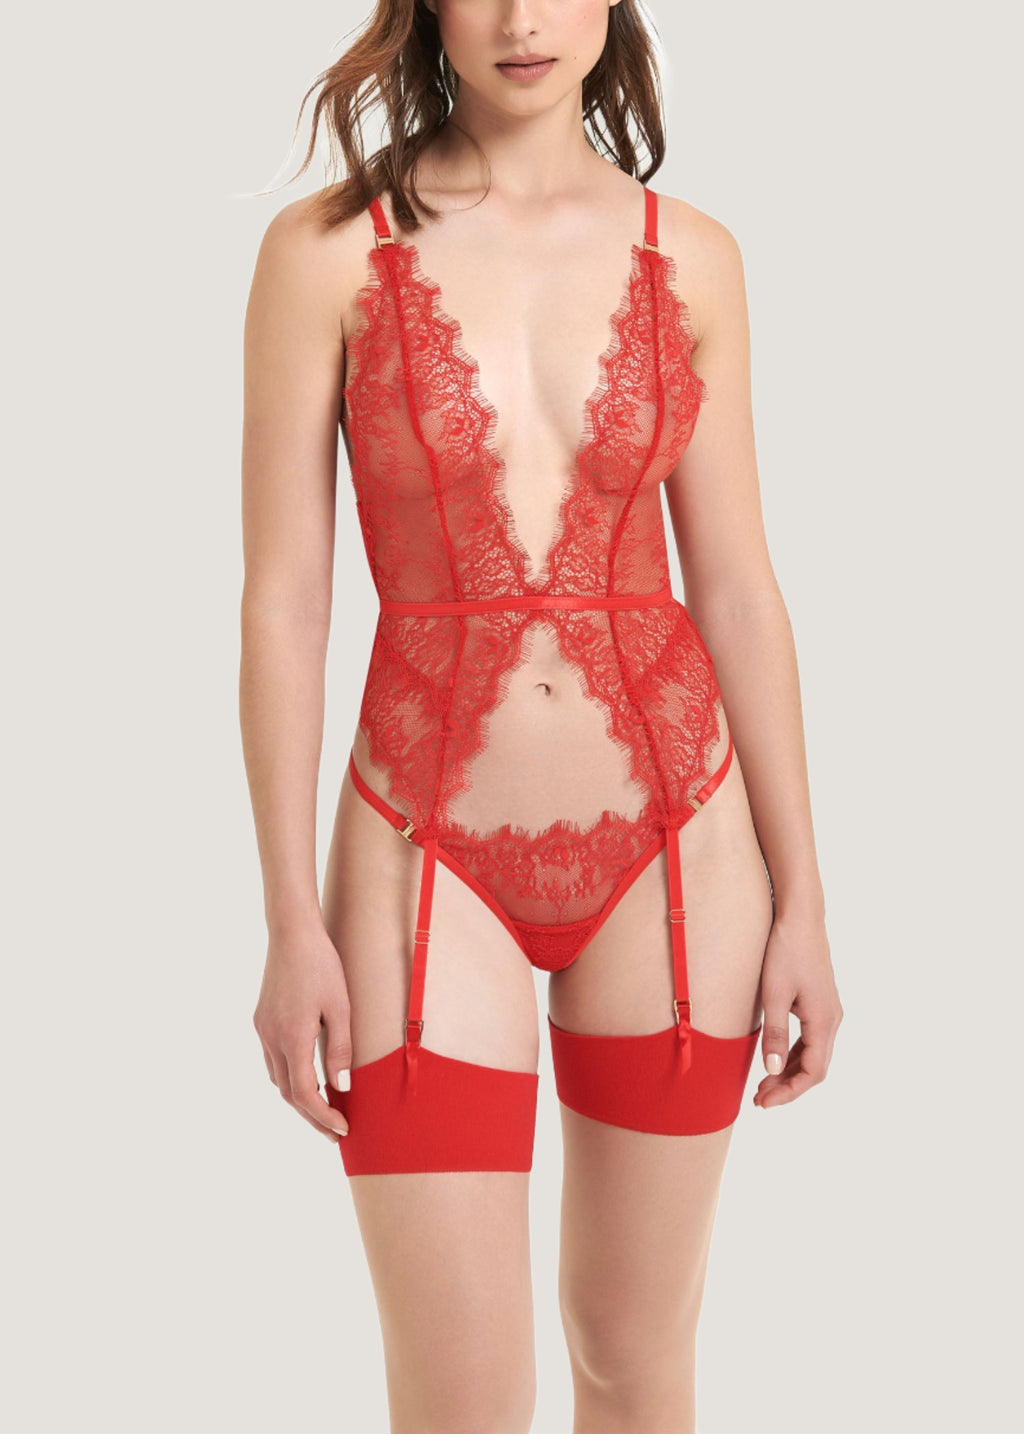 Figleaves Juliette Lace Sexy Feminine Red Basque With Suspender Straps RRP.  £35